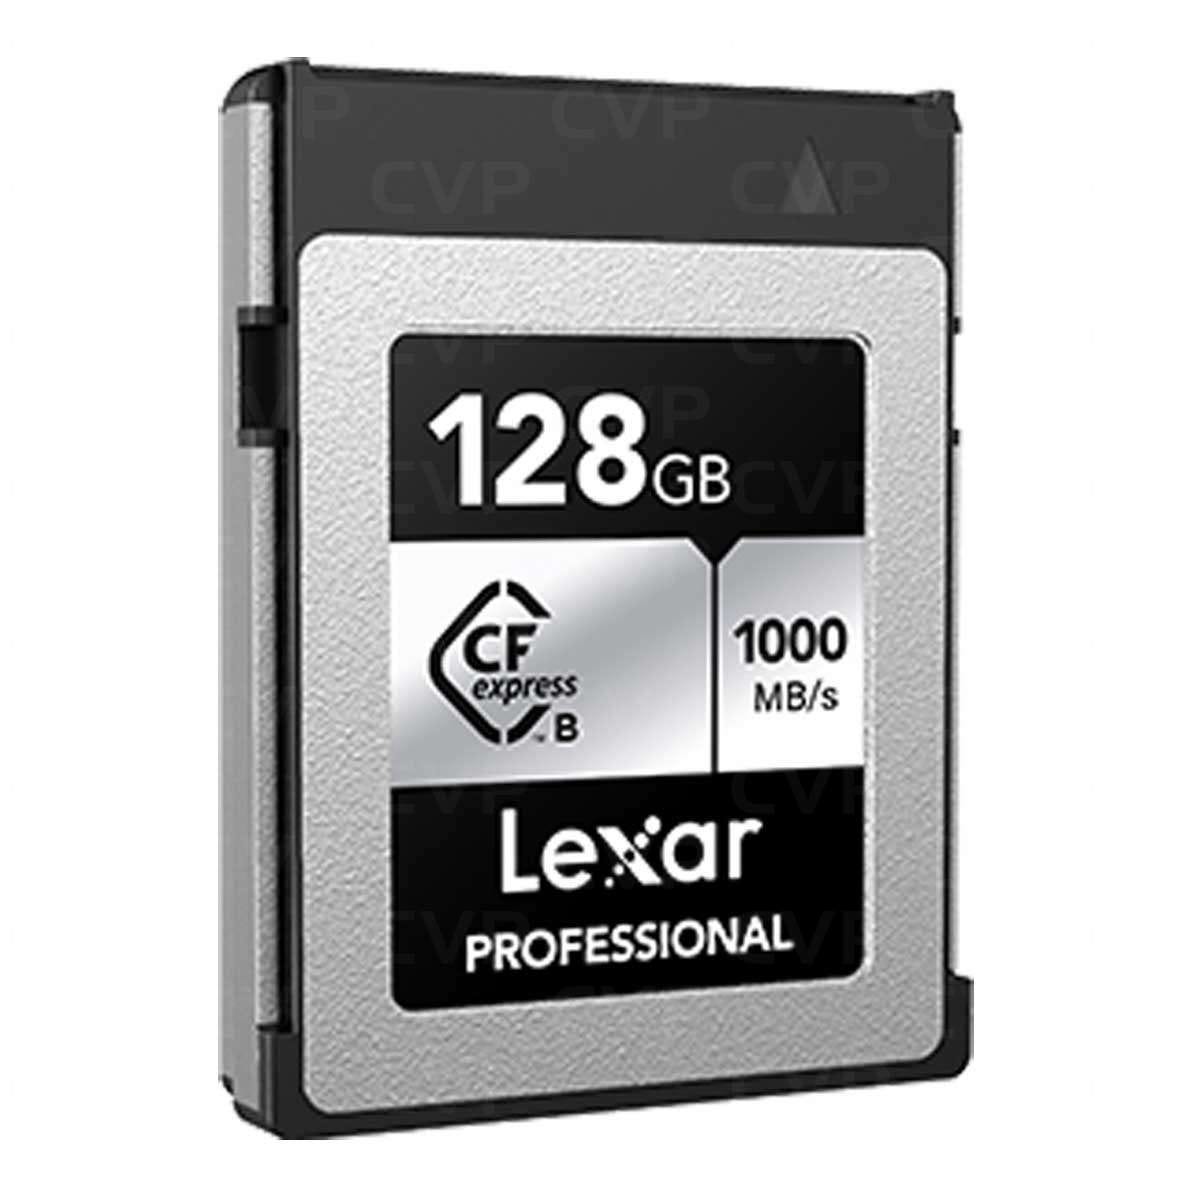 Image of Lexar Professional CFexpress Type B - 128GB SILVER Card 1000MB/s read / 600MB/s write